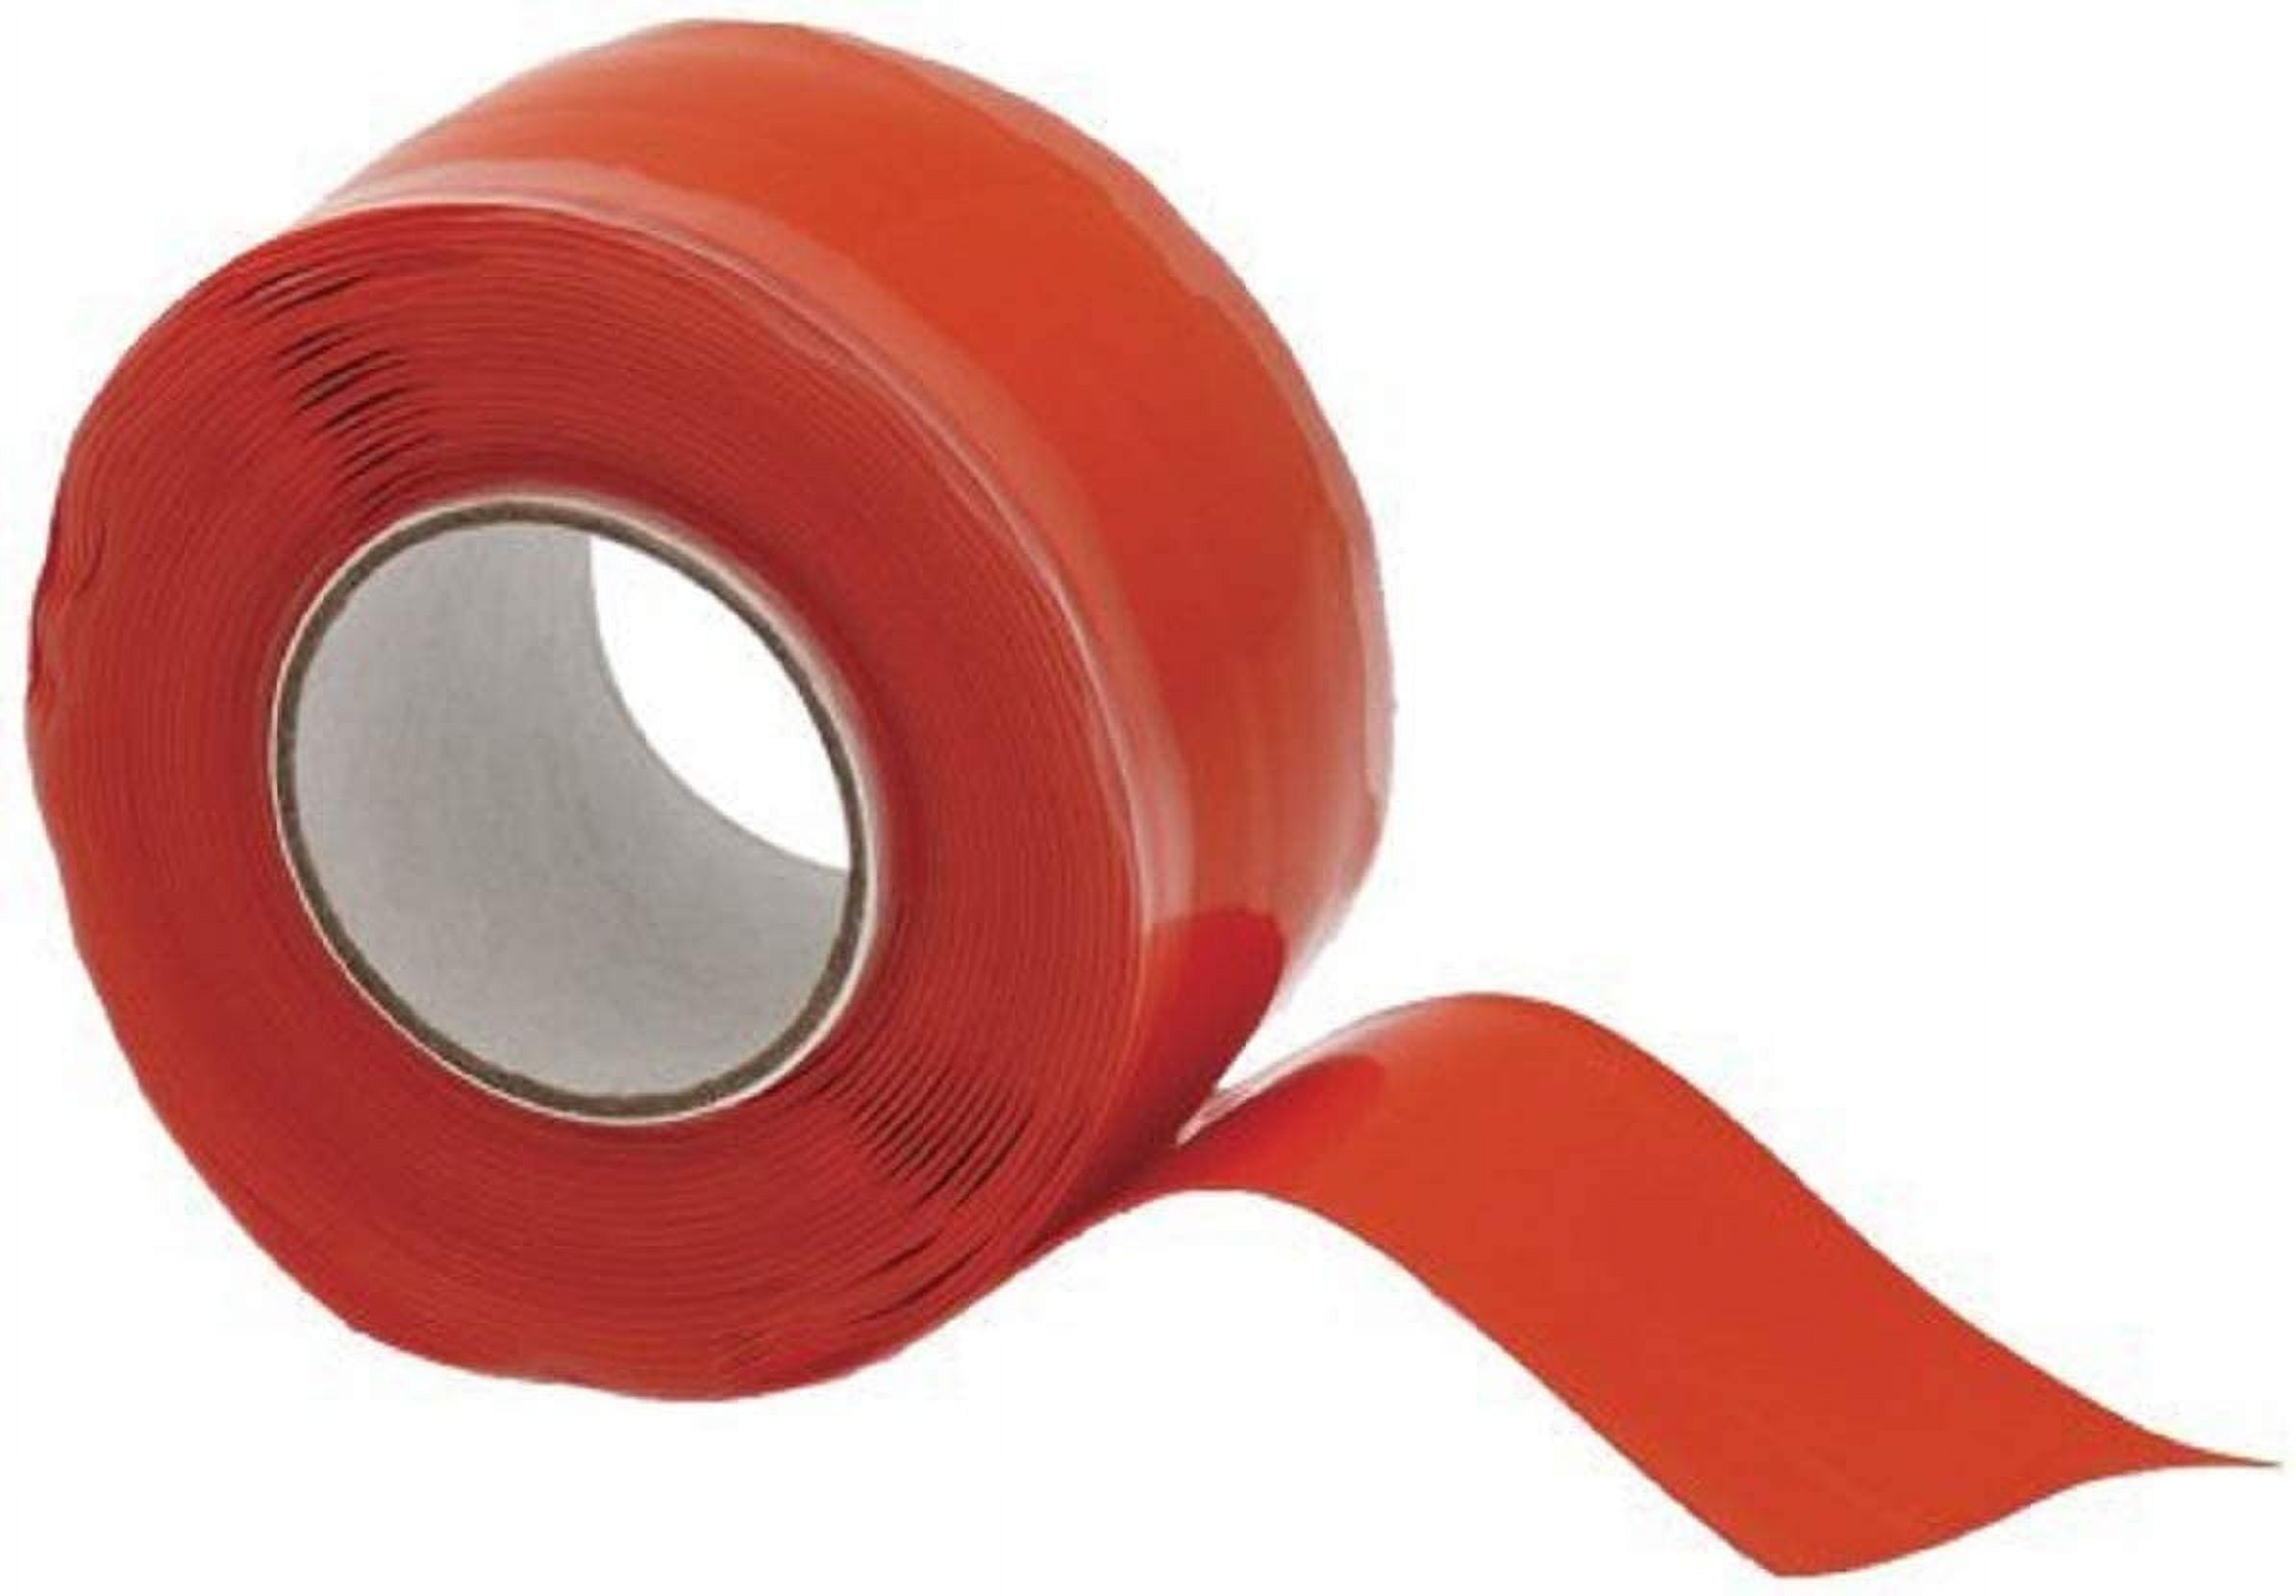 XFasten Silicone Self Fusing Tape 1-Inch x 36-Foot (Clear) 